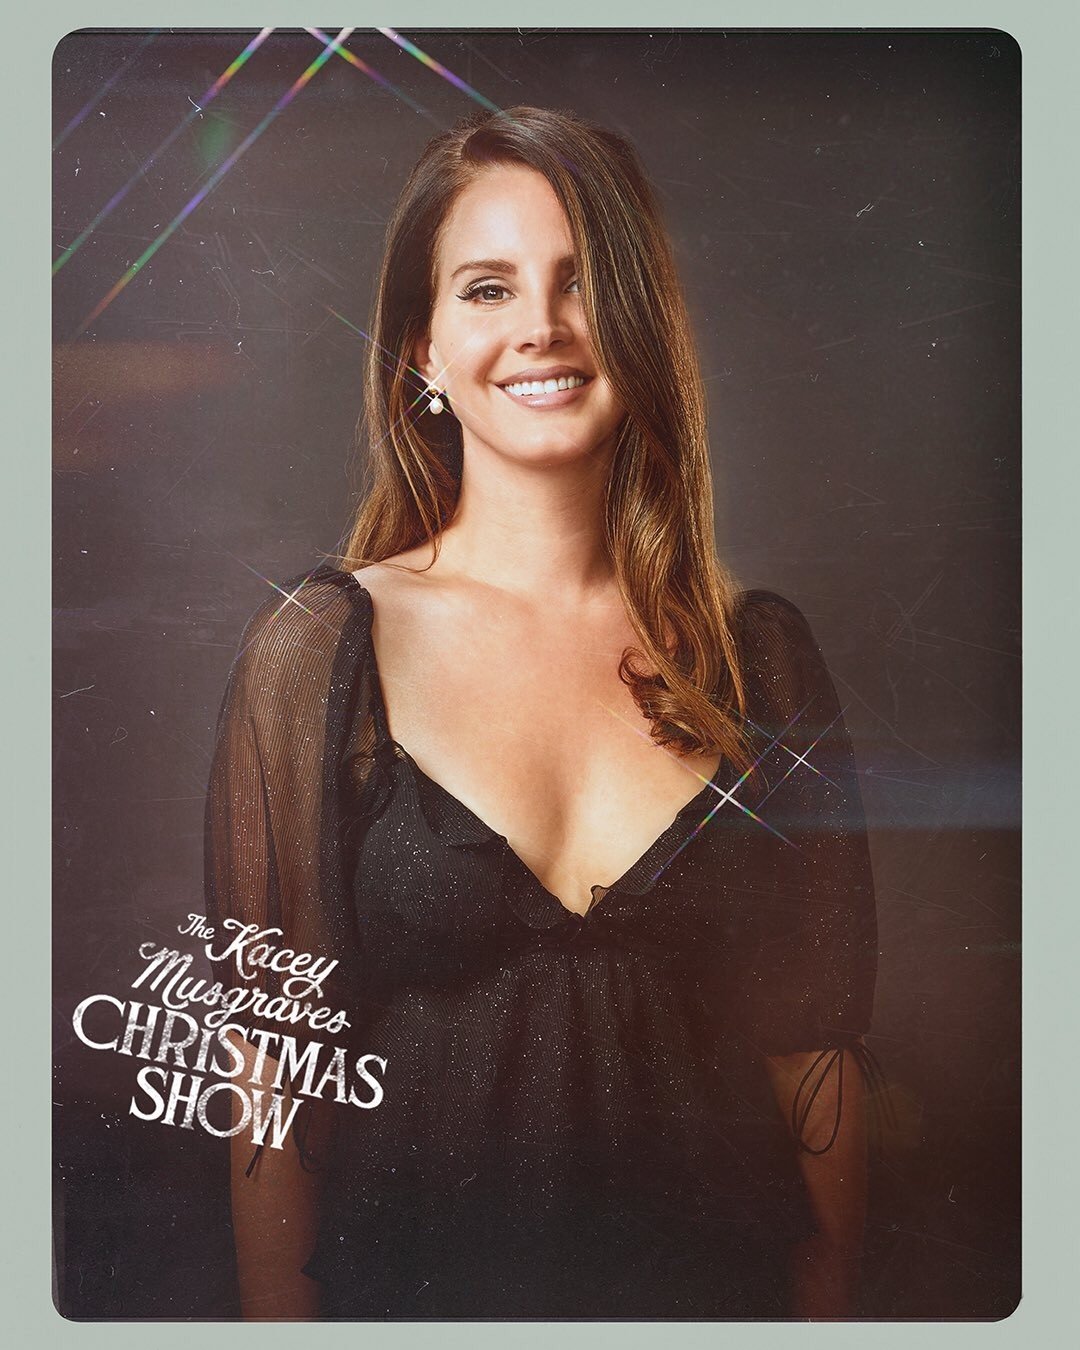 Poster of Amazon Studios' The Kacey Musgraves Christmas Show (2019)